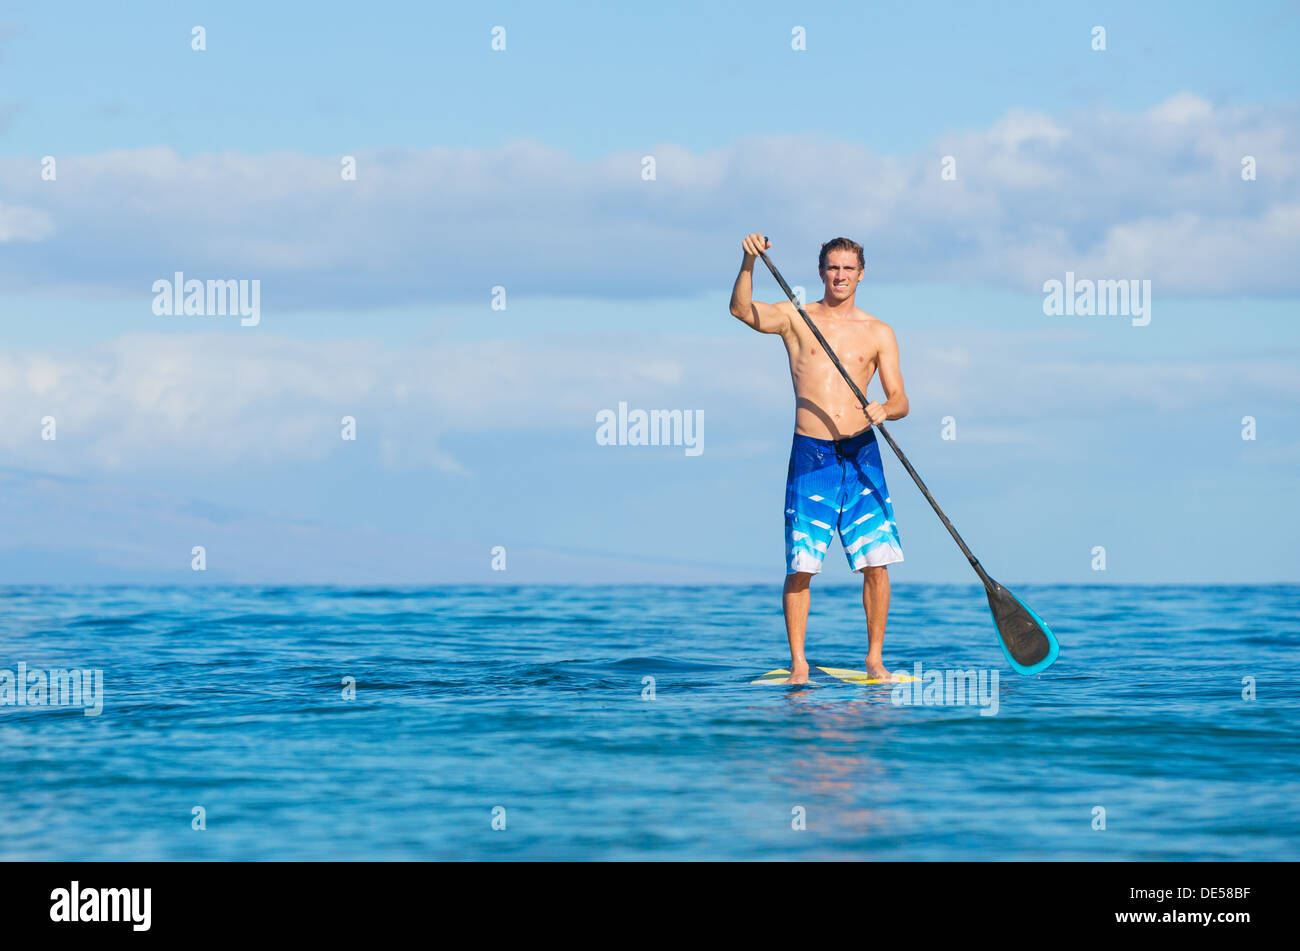 Young Attractive Mann on Stand Up Paddle Board, SUP, in the Blue Waters off Hawaii, Active Life Concept Stock Photo